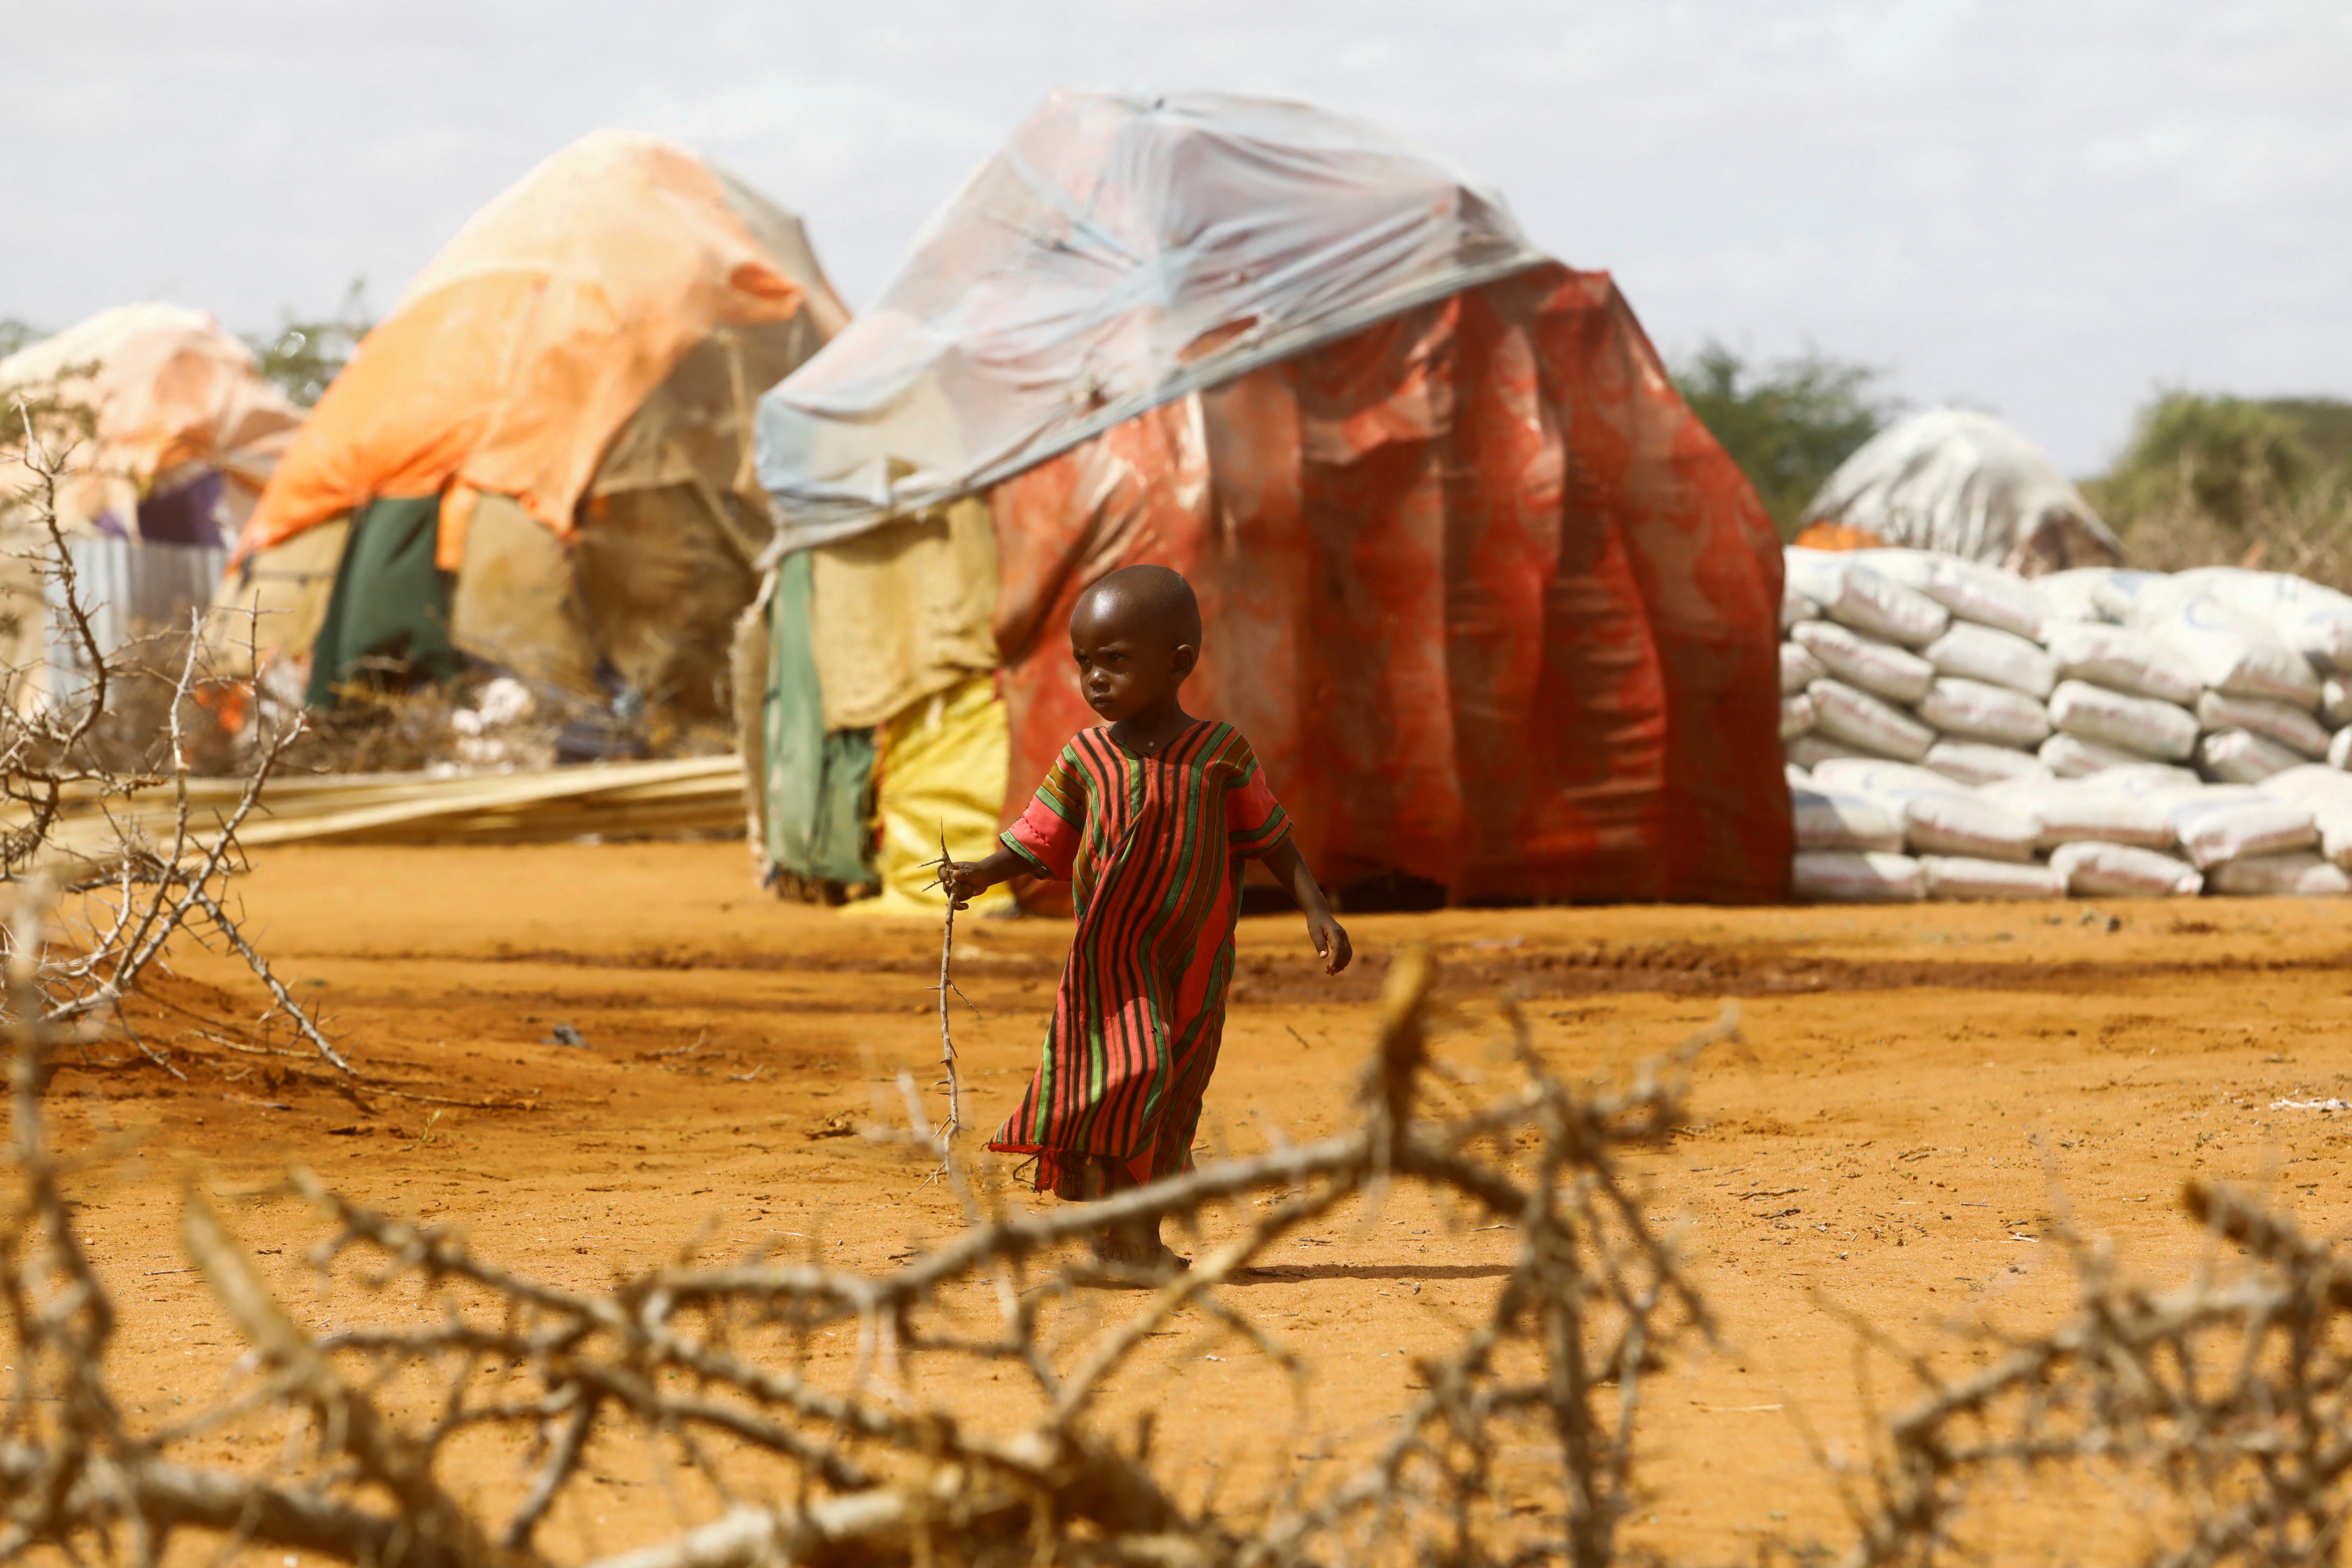 A child walks outside makeshift shelters at the Kaxareey camp for the internally displaced people after they fled from the severe droughts, in Dollow